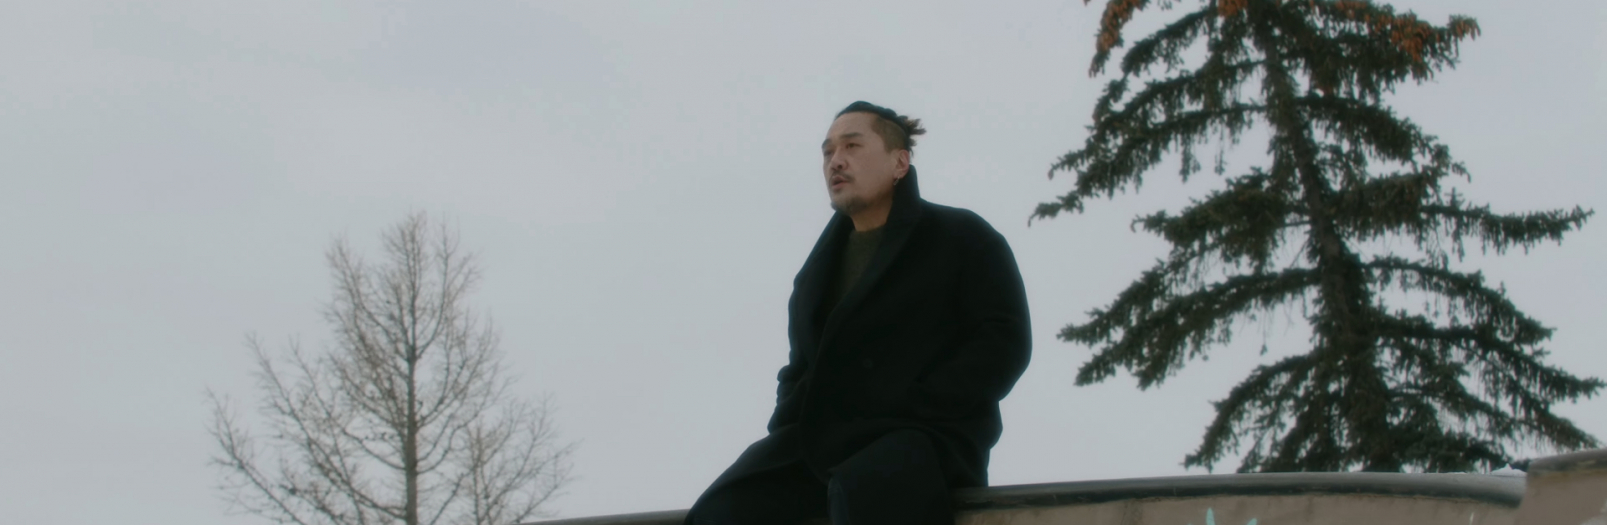 A Korean man sits on a wall wearing a winter coat.